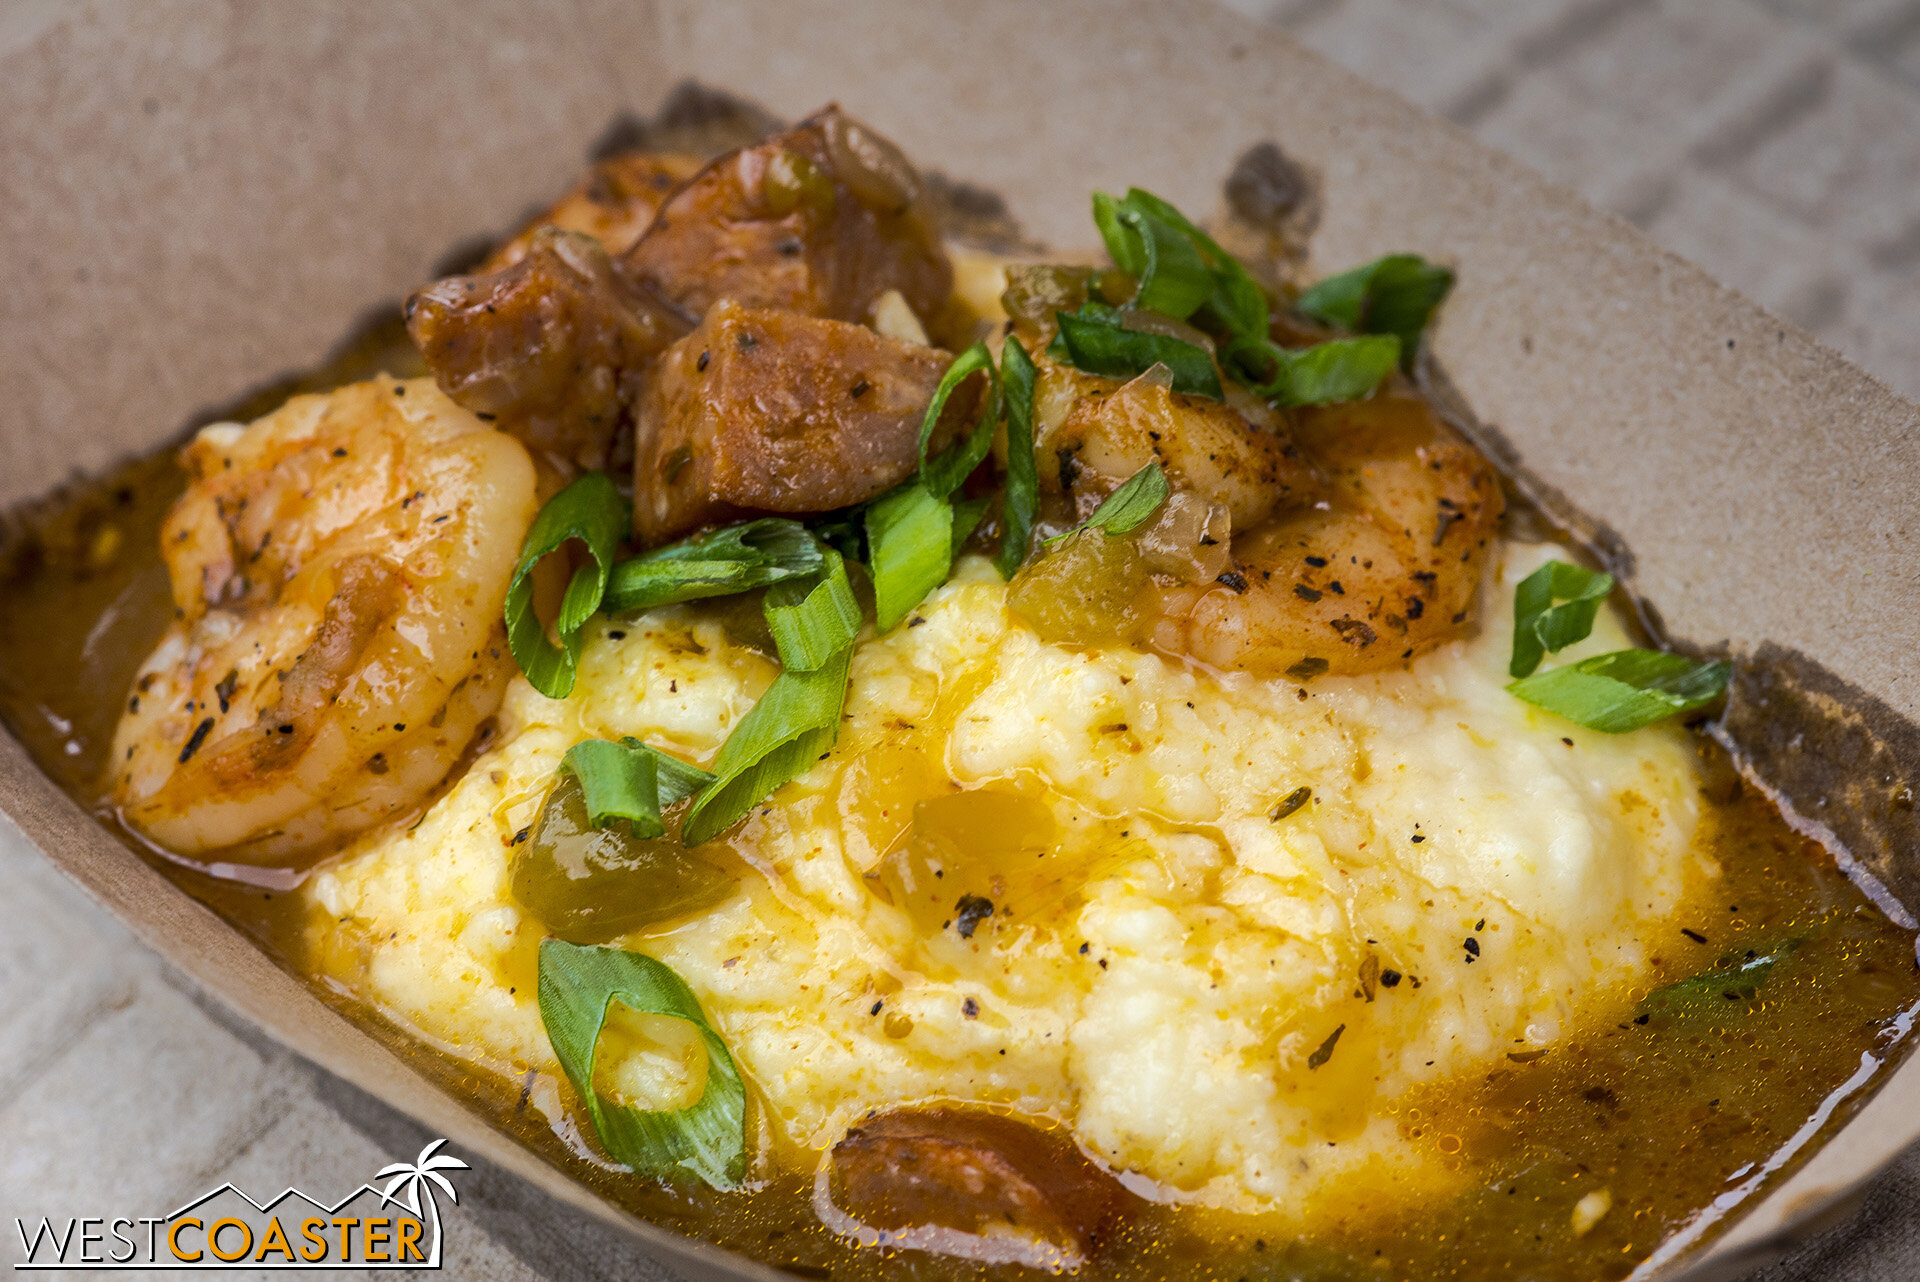  Holiday Duets Marketplace: Shrimp &amp; Grits – With Andouille sausage  Tasty but a little soggy this time around.  The shrimp was great, and the grits a nice texture, but it was middle of the road in my rankings. 